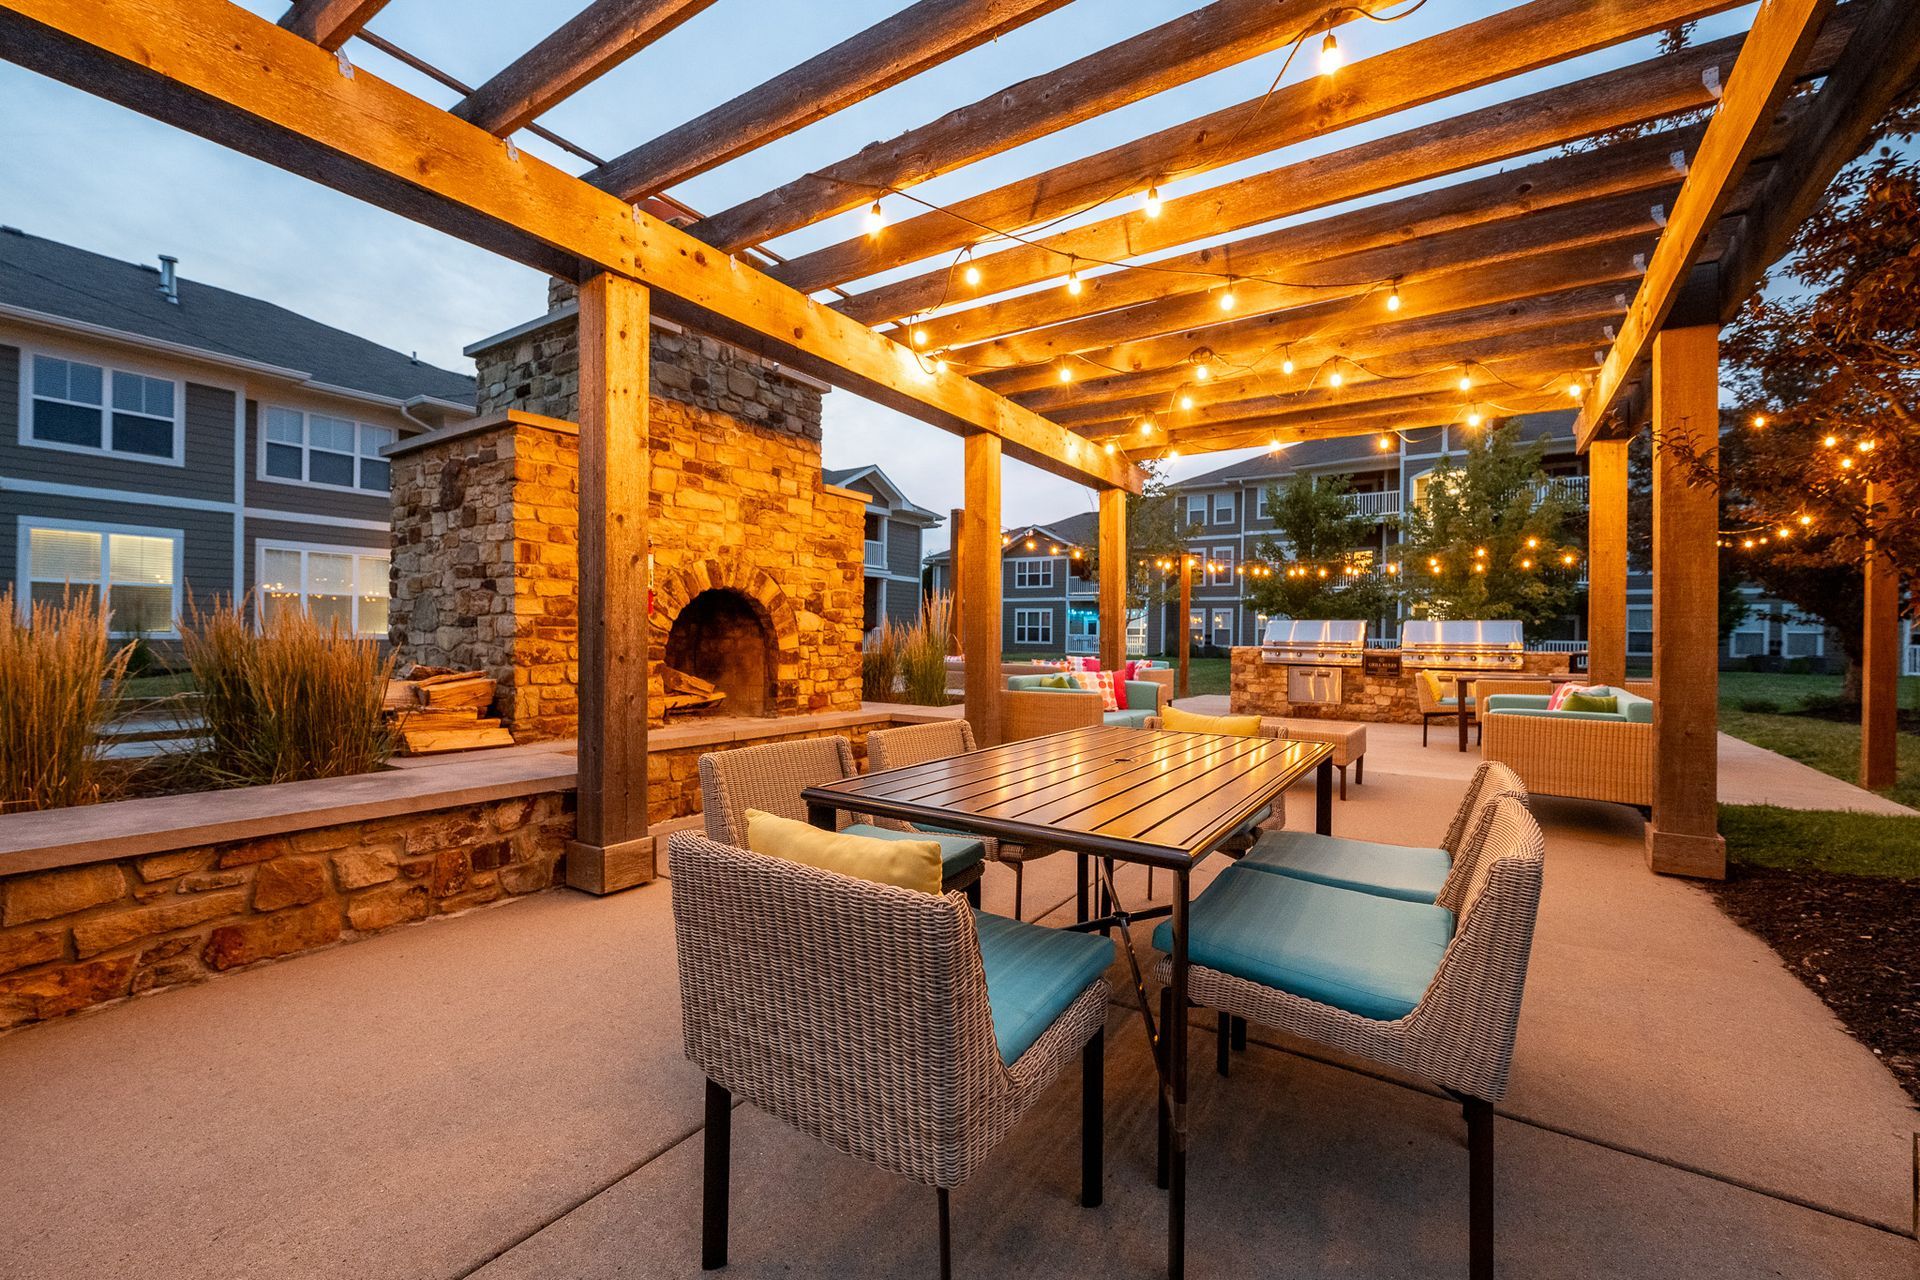 A patio with a table and chairs under a pergola with a fireplace at Maple Knoll Apartments.